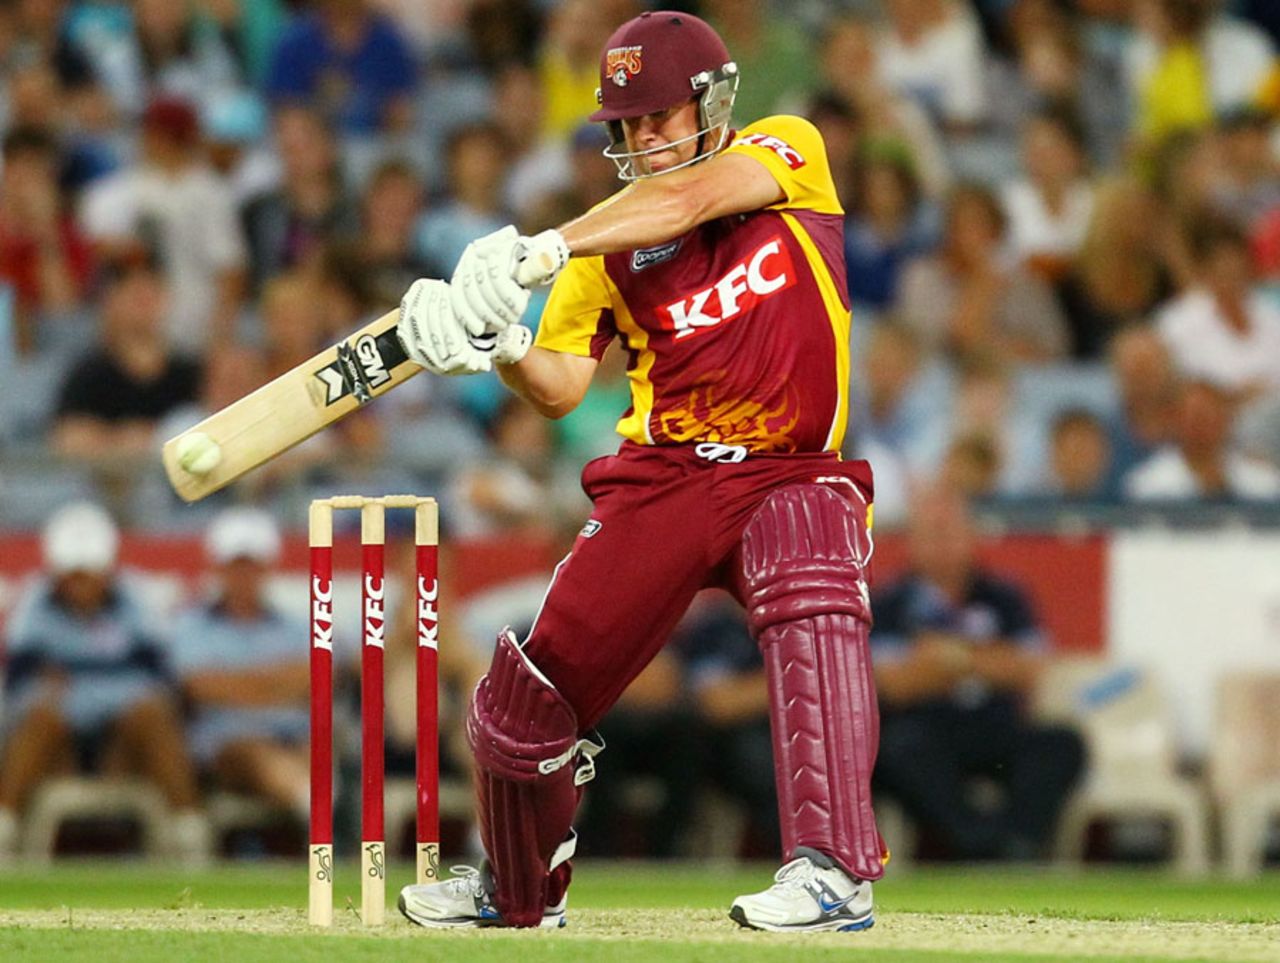 James Hopes cuts during his unbeaten half-century, New South Wales v Queensland, Big Bash, Sydney, January 29, 2011